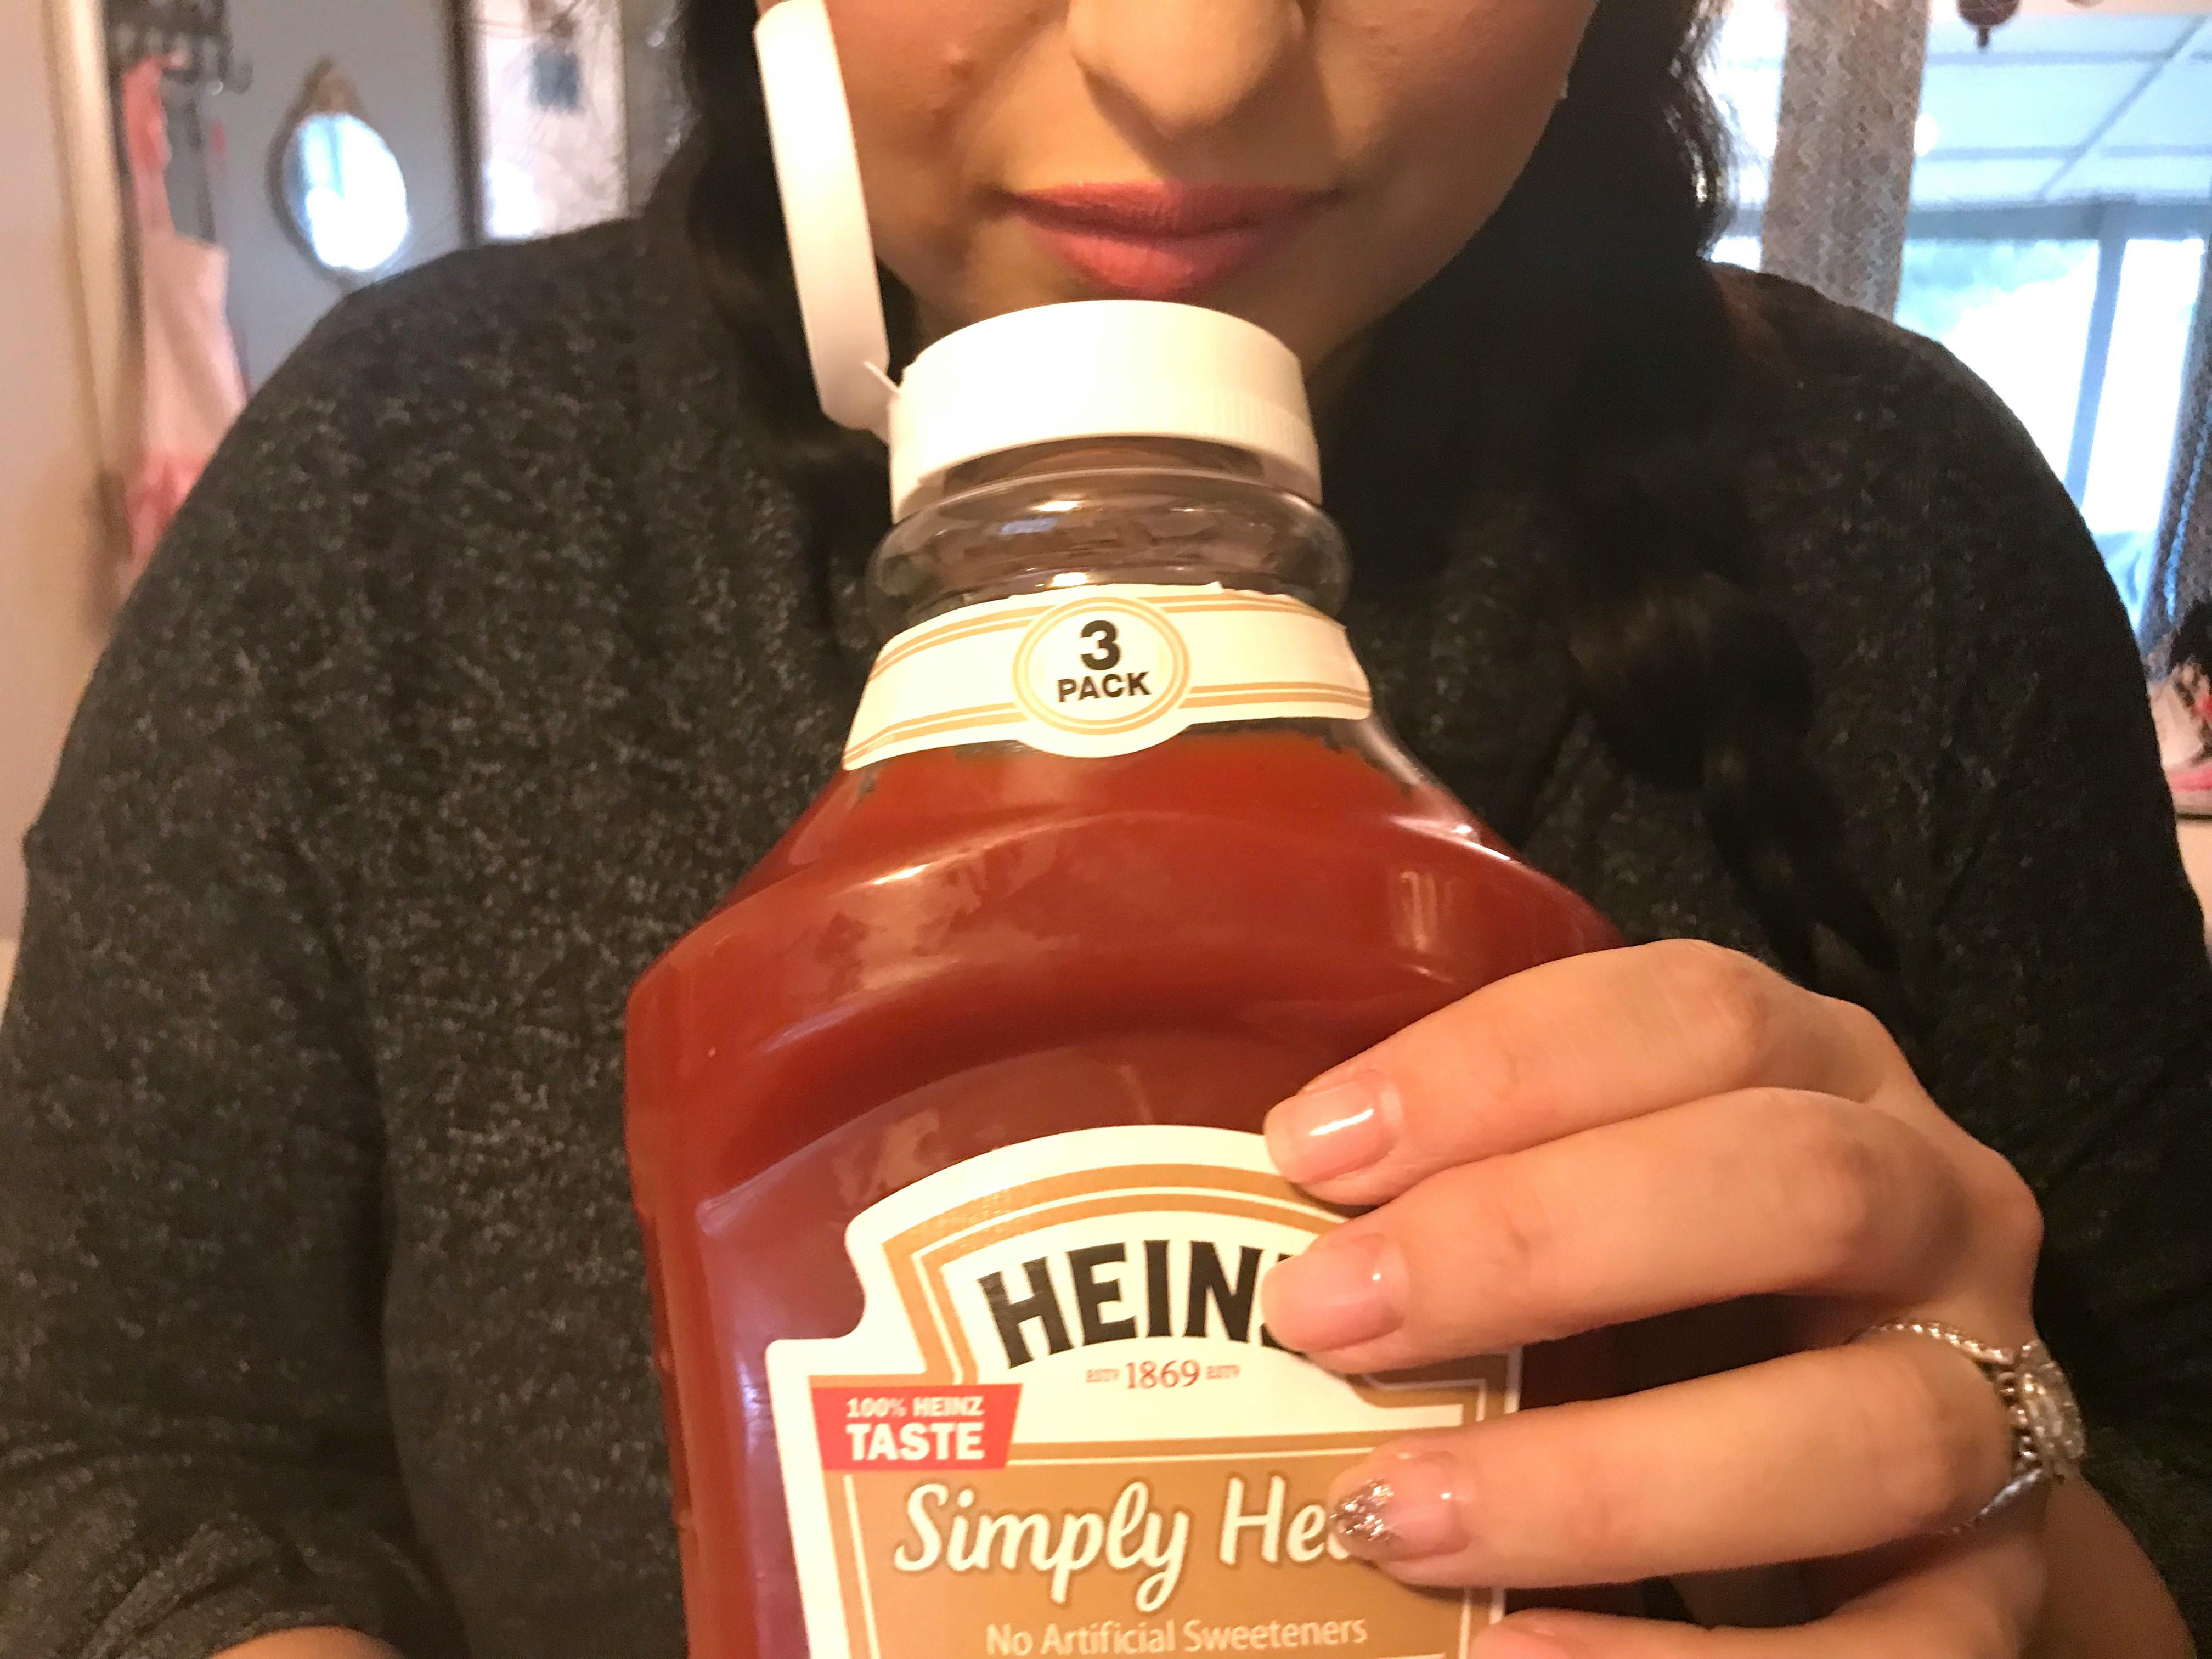 A person smelling a bottle of Heinz ketchup.